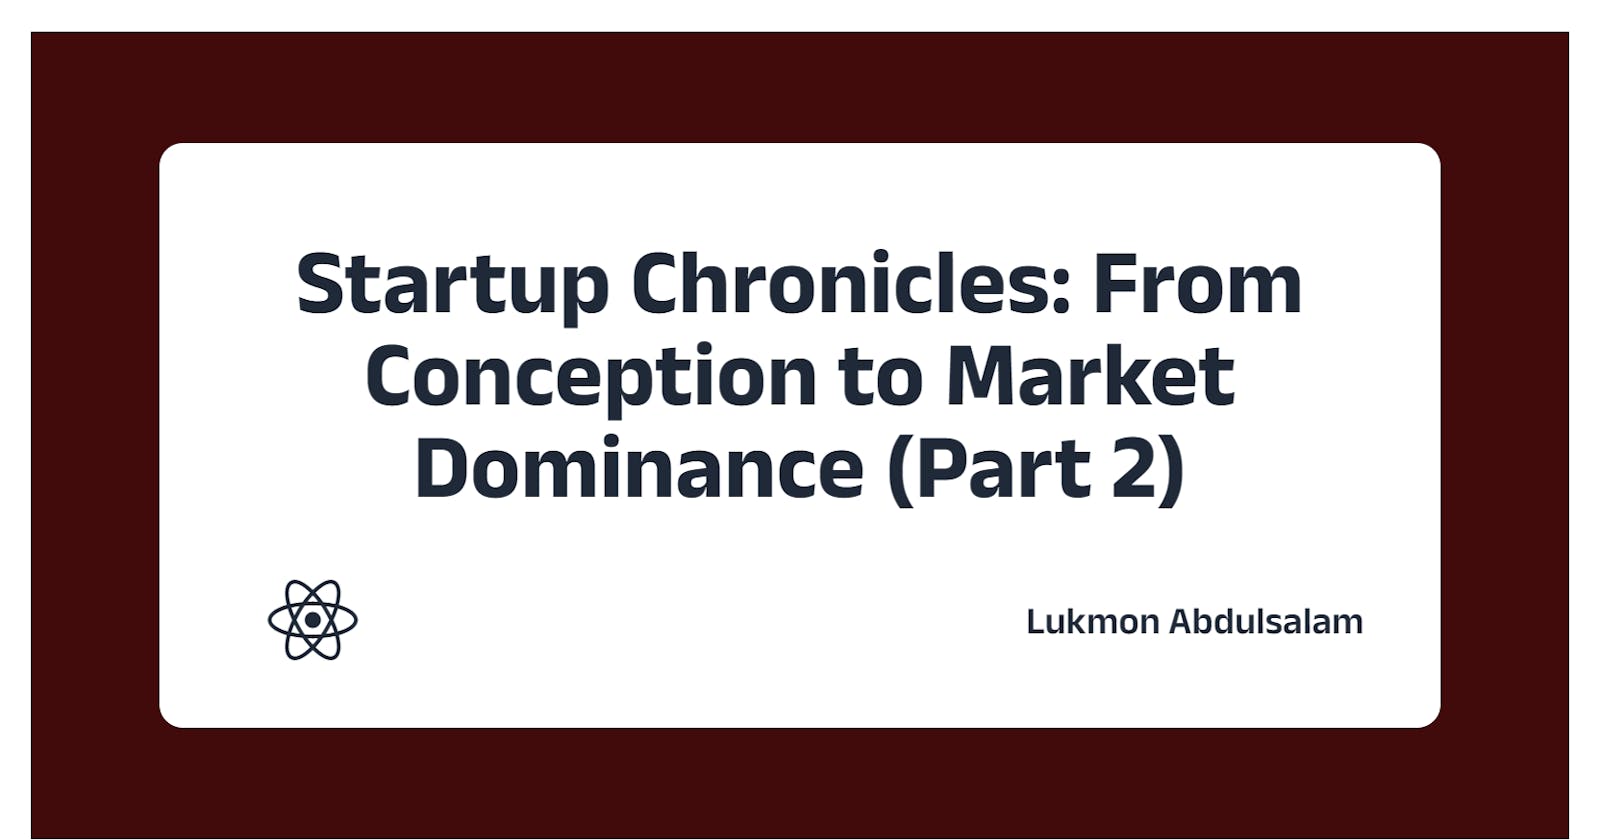 Startup Chronicles: From Conception to Market Dominance (Part 2)